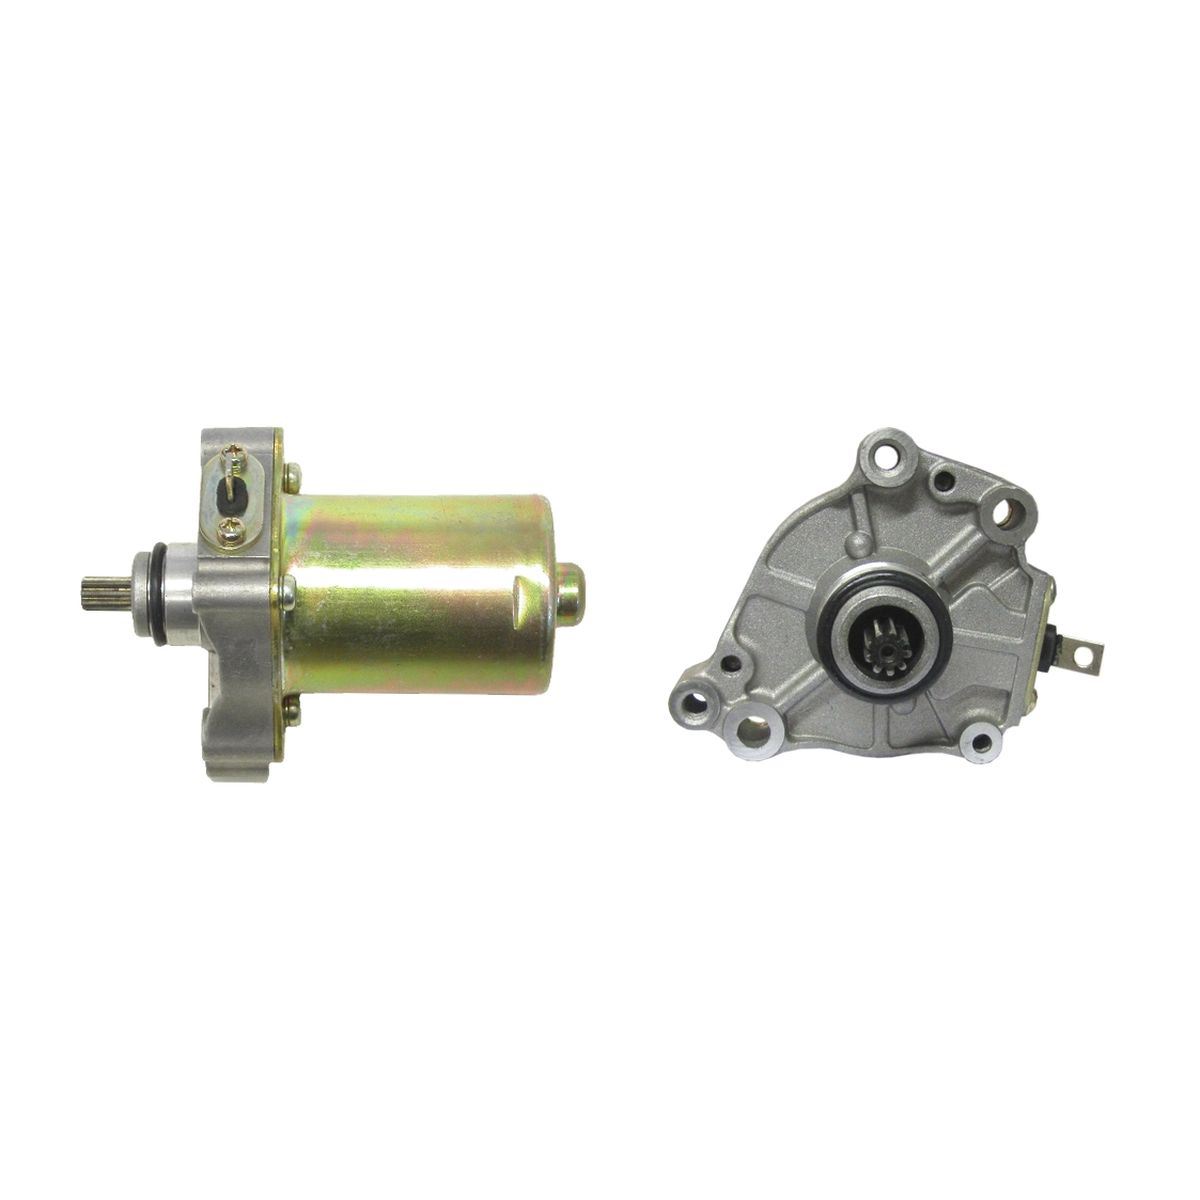 Starter Motor Mitsuba As Fitted To Rotax 125 & Aprillia RS125 Engines 